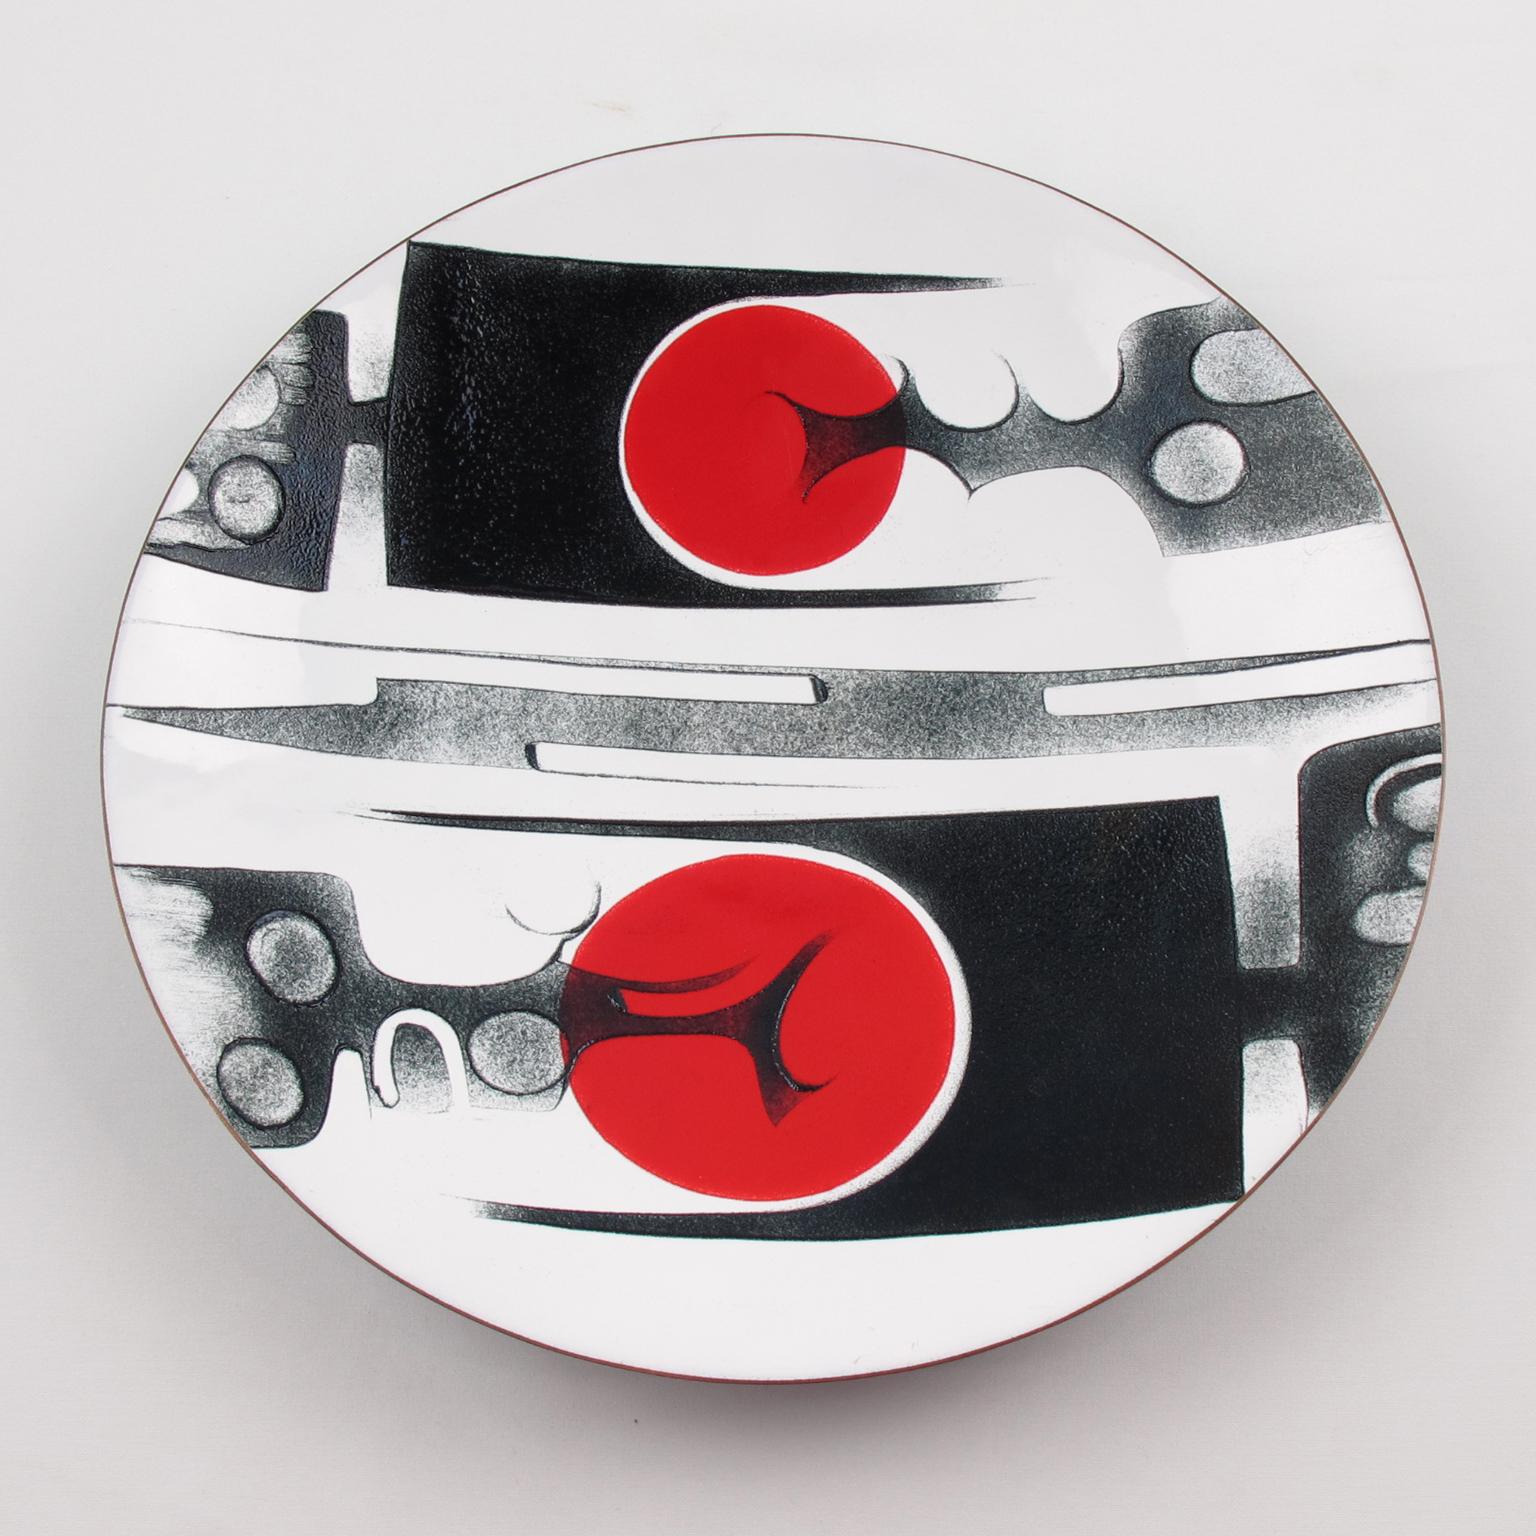 Stunning Mid-Century modernist 1970s enameled plate by Canadian Quebec artist, Anita Trottier. Abstract design with brutalist contrast in red and black colors on an extra white background. Anita Trottier created a highly stylized abstracted